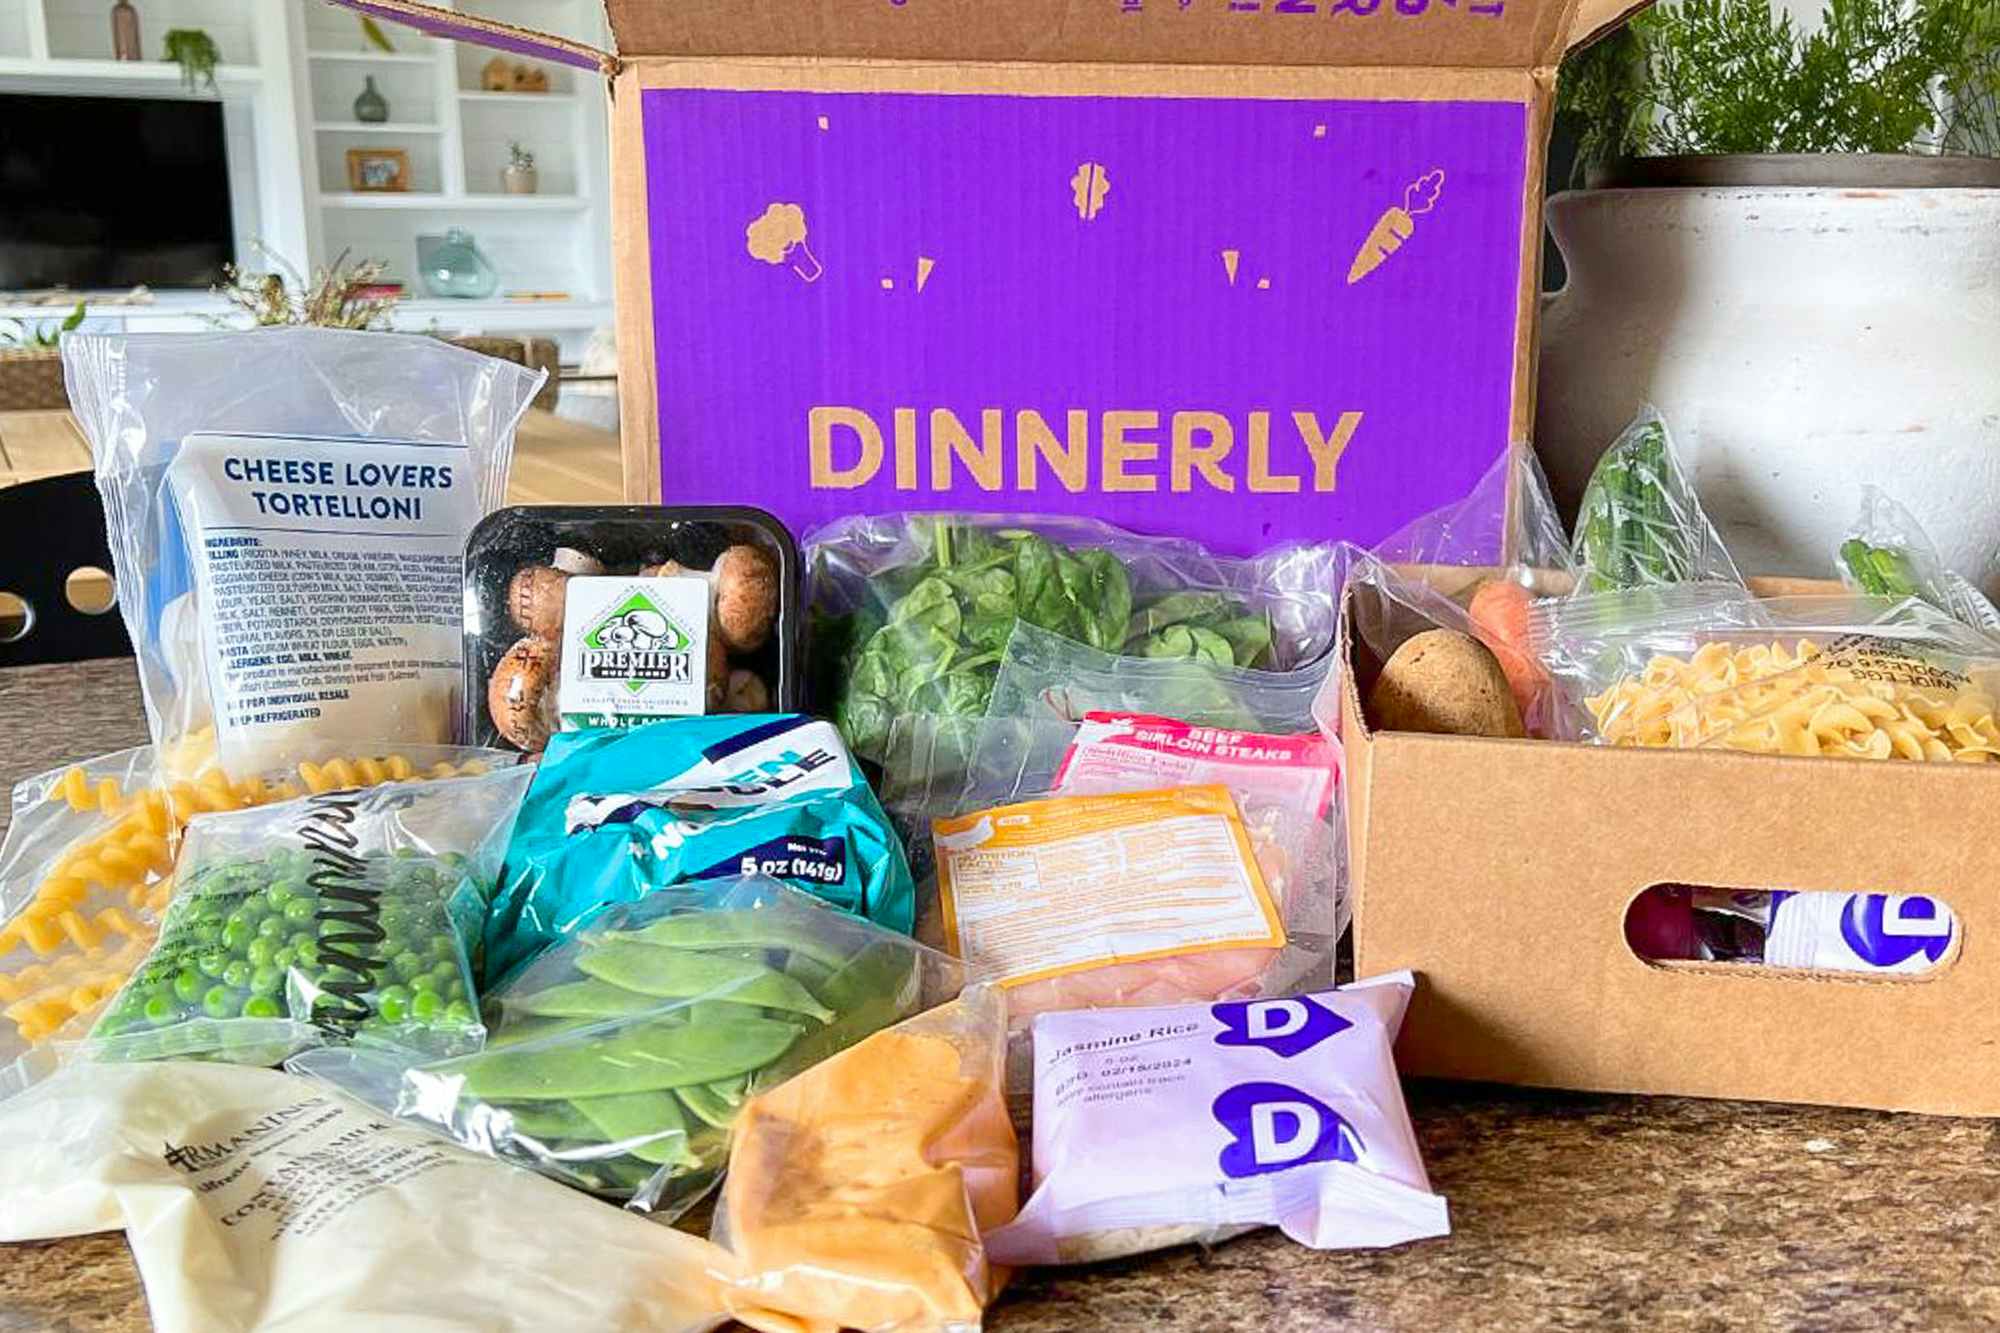 a Dinnerly meal kit box unpacked on a counter